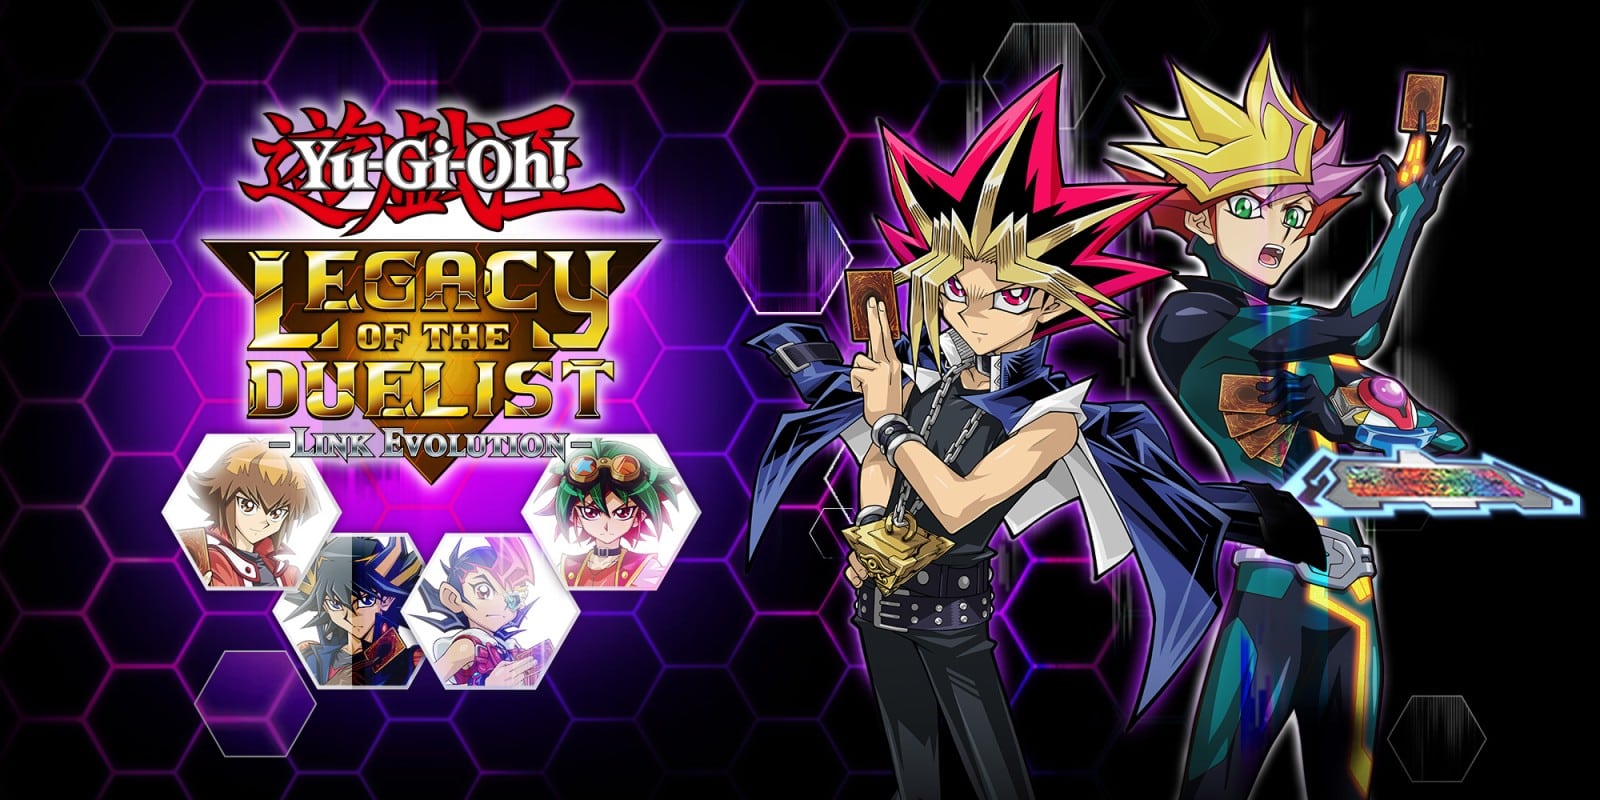 YuGiOh! Legacy of the Duelist Link Evolution Out Now! Gayming Magazine